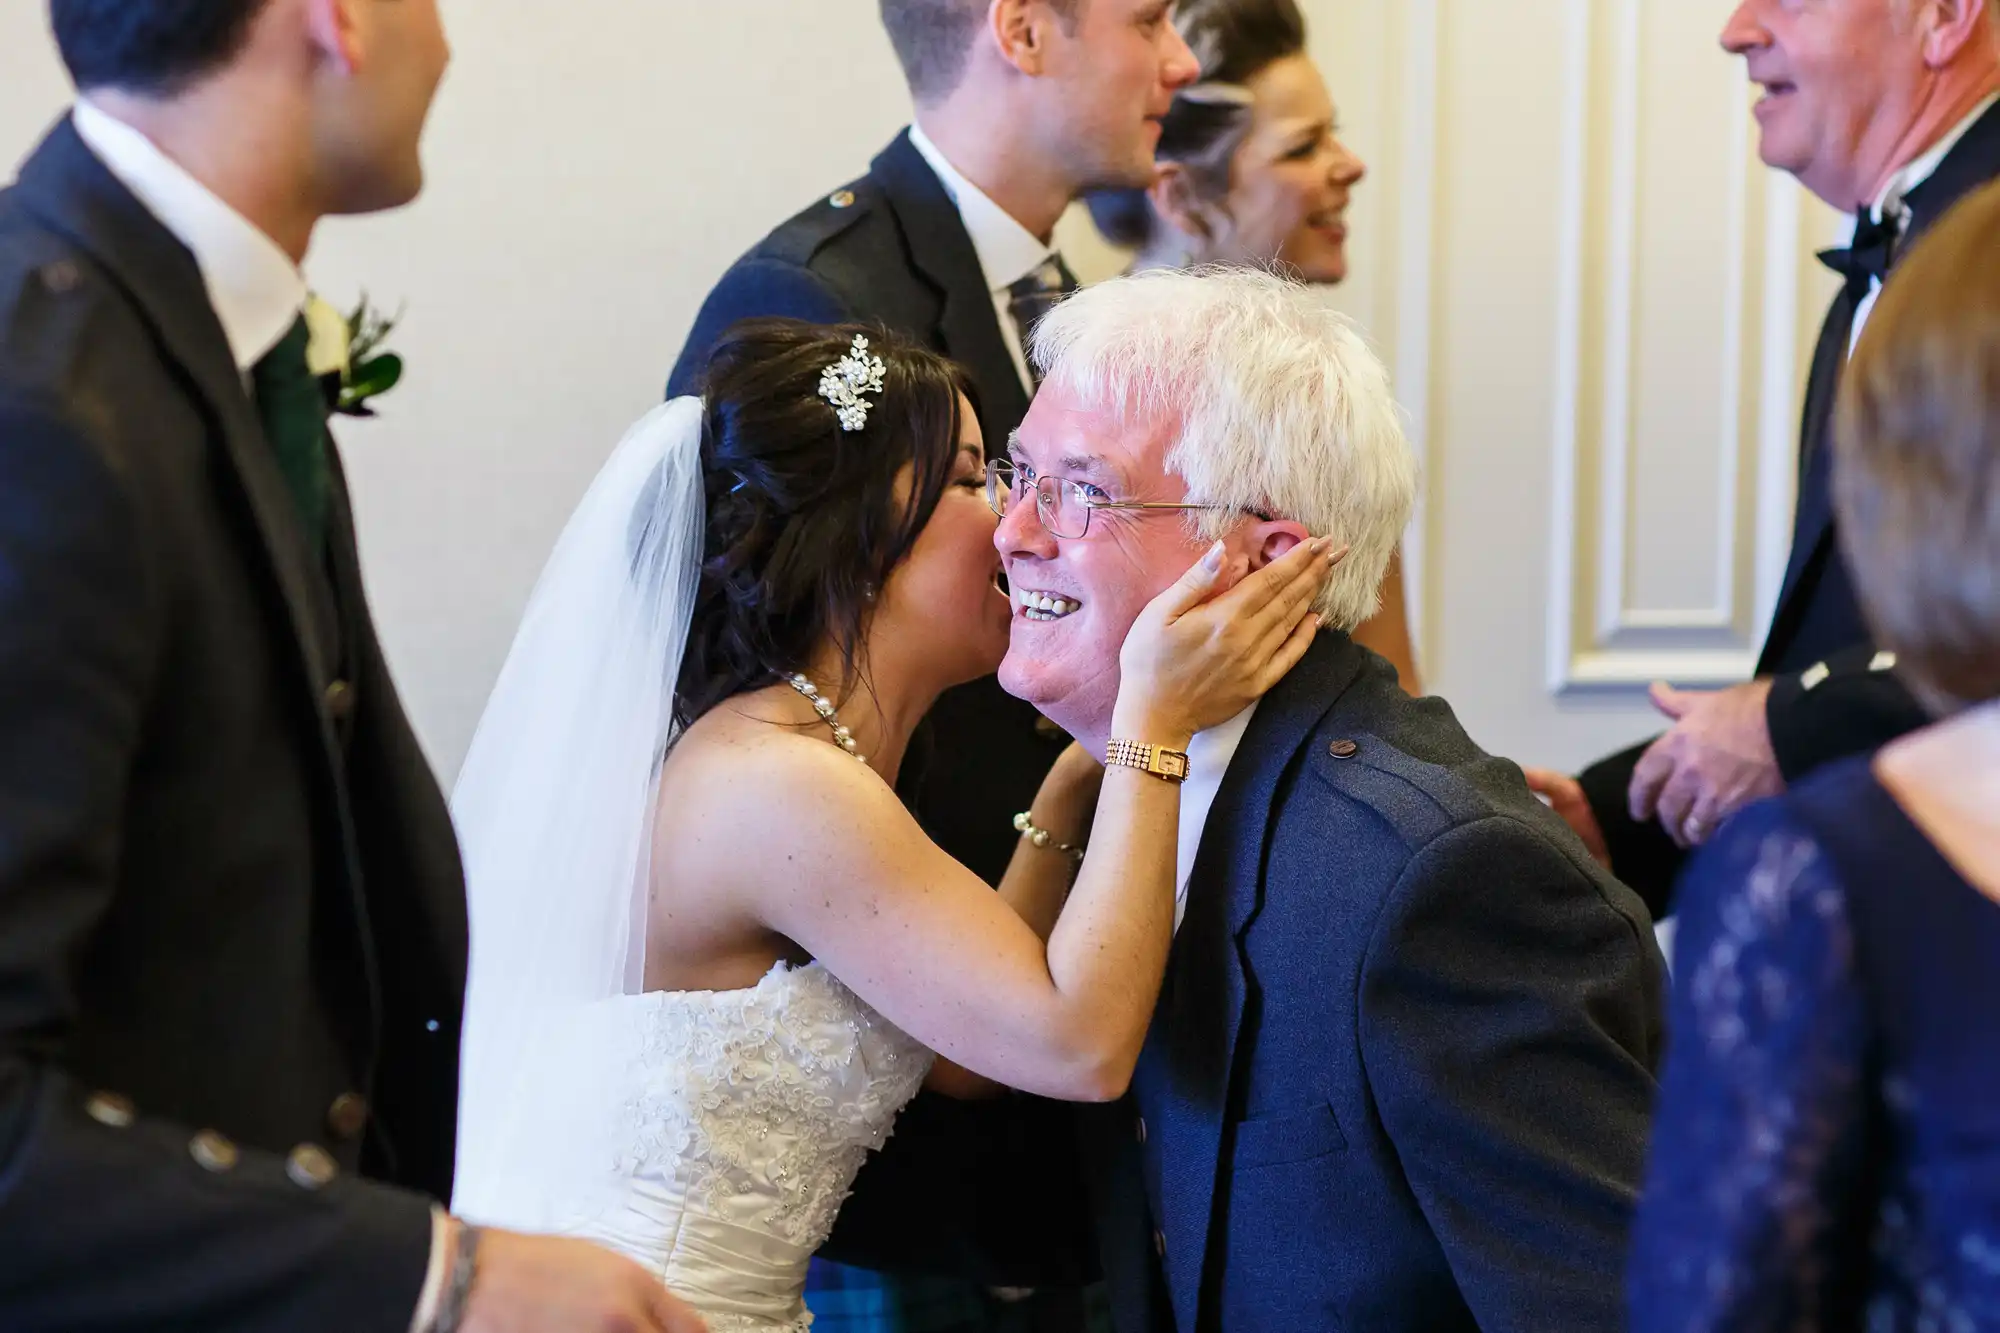 A bride in a white dress kisses a smiling older man on the cheek in a crowded room at a wedding celebration.